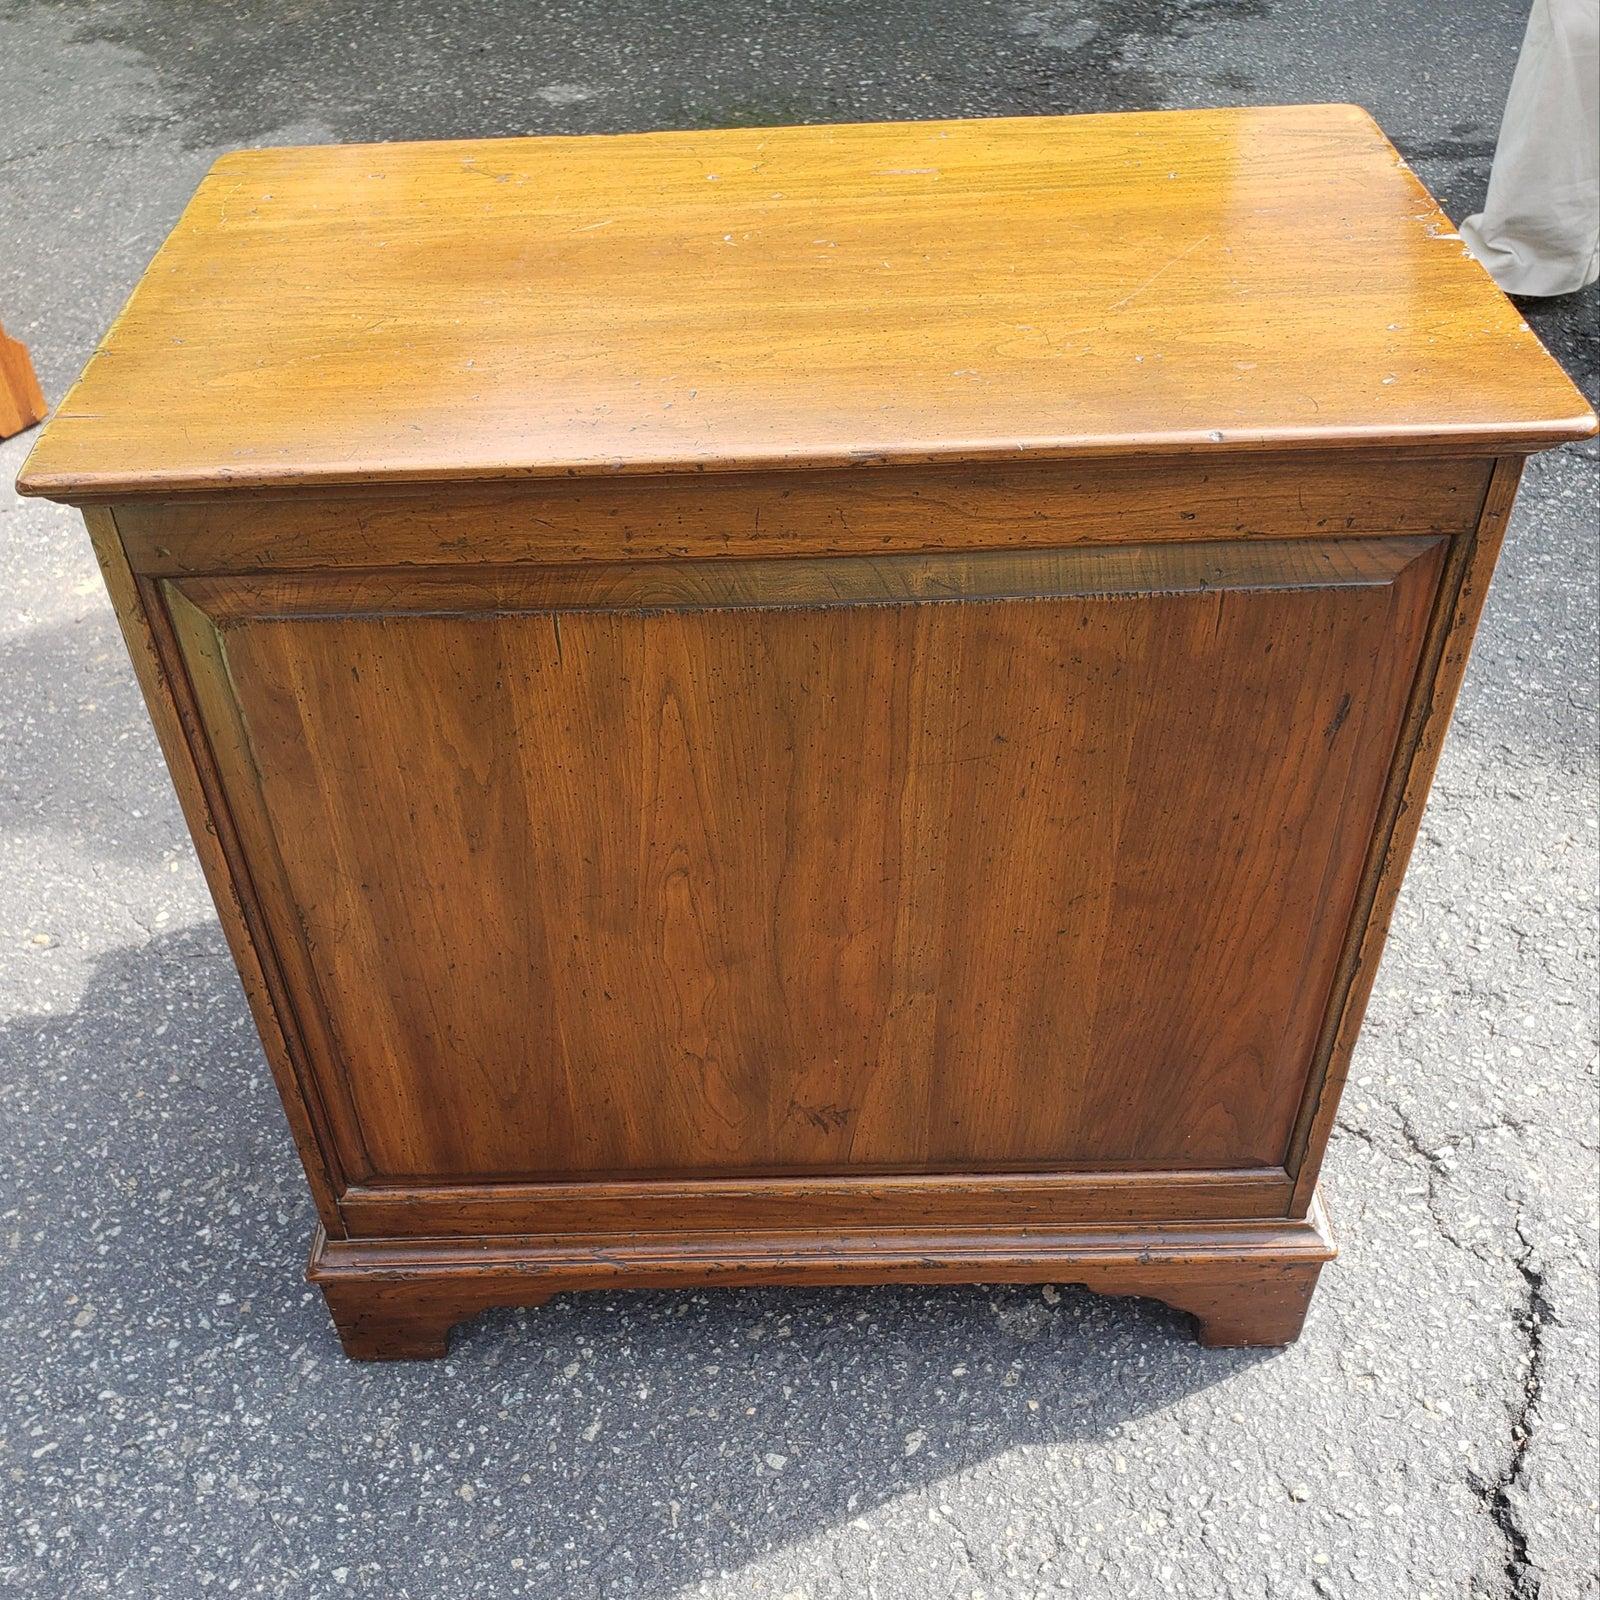 1940s Pennsylvania House Chest of Drawers In Good Condition For Sale In Germantown, MD